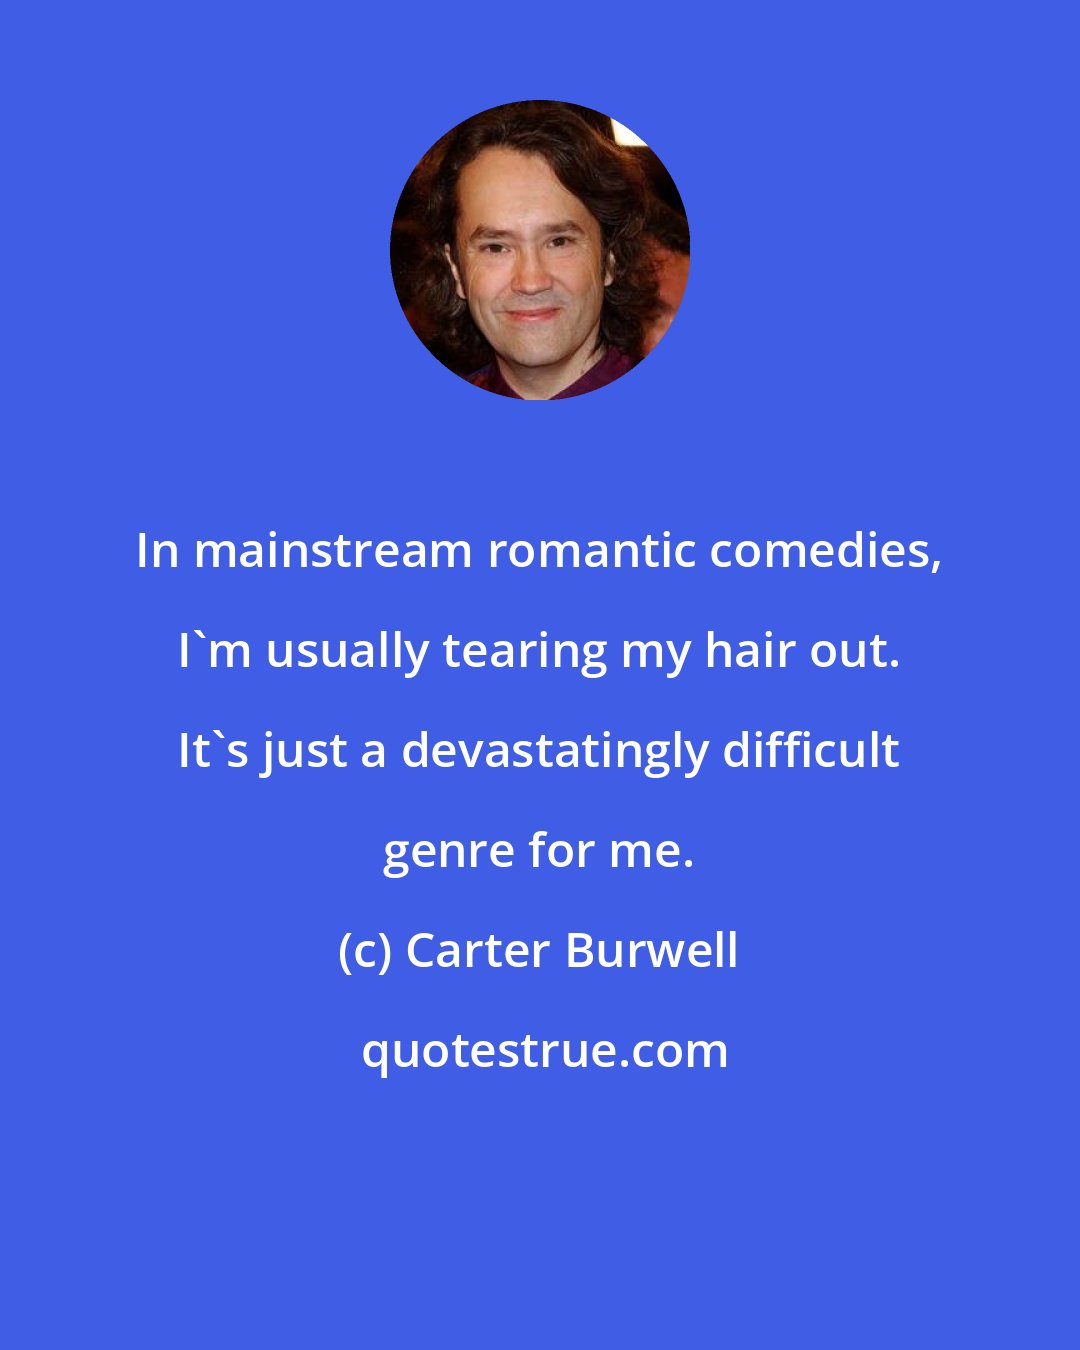 Carter Burwell: In mainstream romantic comedies, I'm usually tearing my hair out. It's just a devastatingly difficult genre for me.